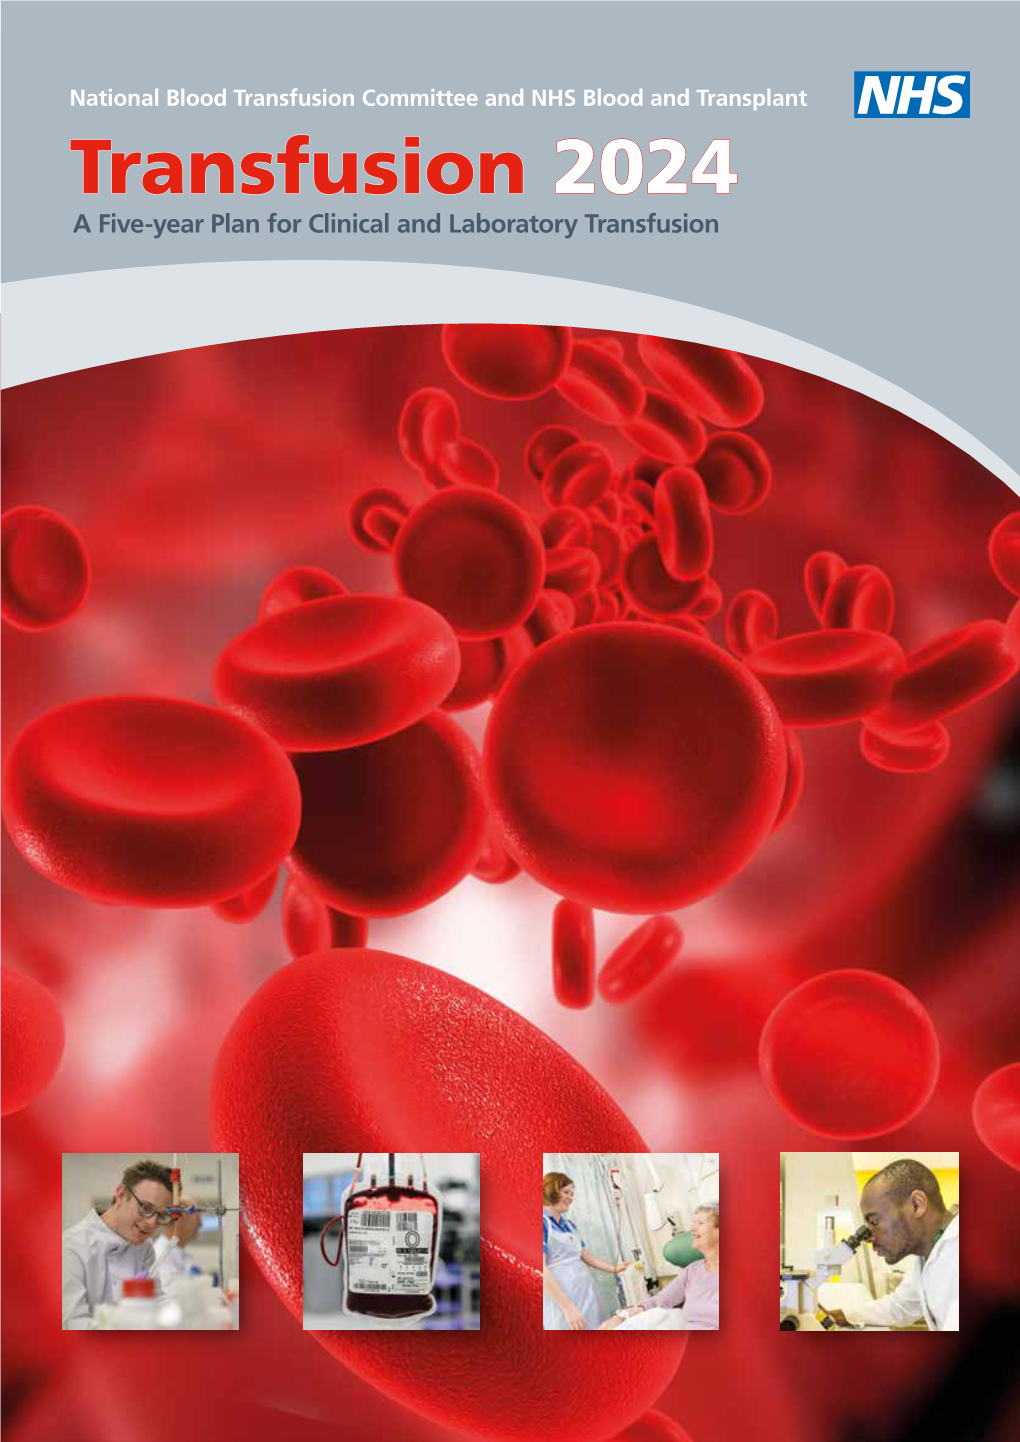 Transfusion 2024 a Five-Year Plan for Clinical and Laboratory Transfusion